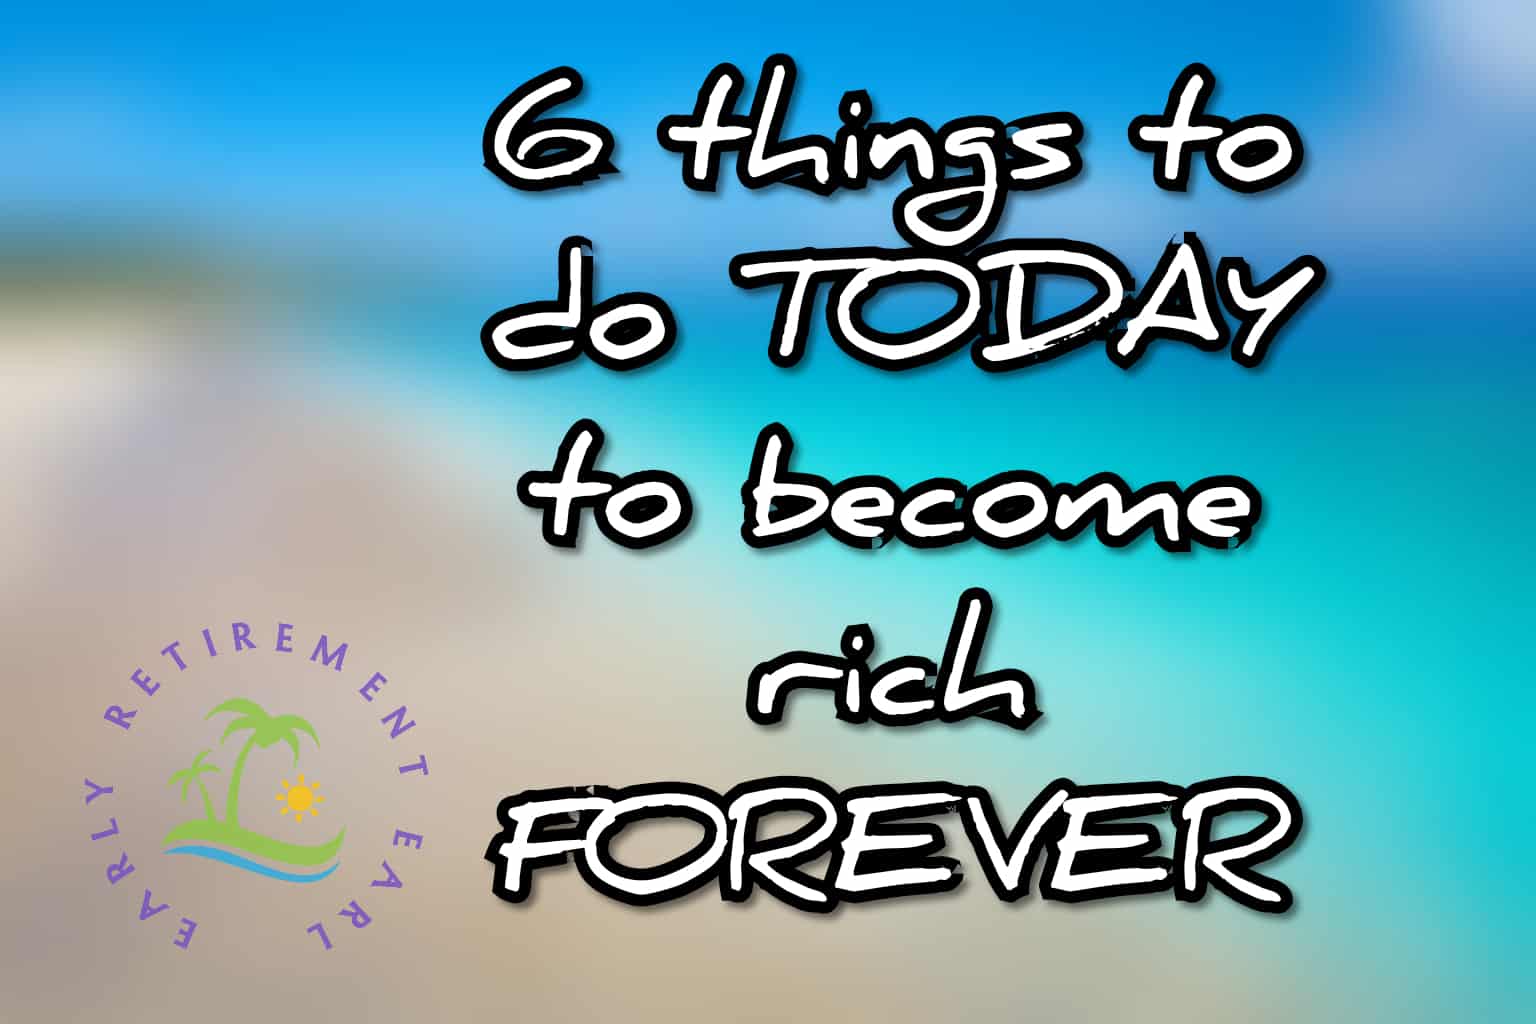 6 Things to do today to become rich forever